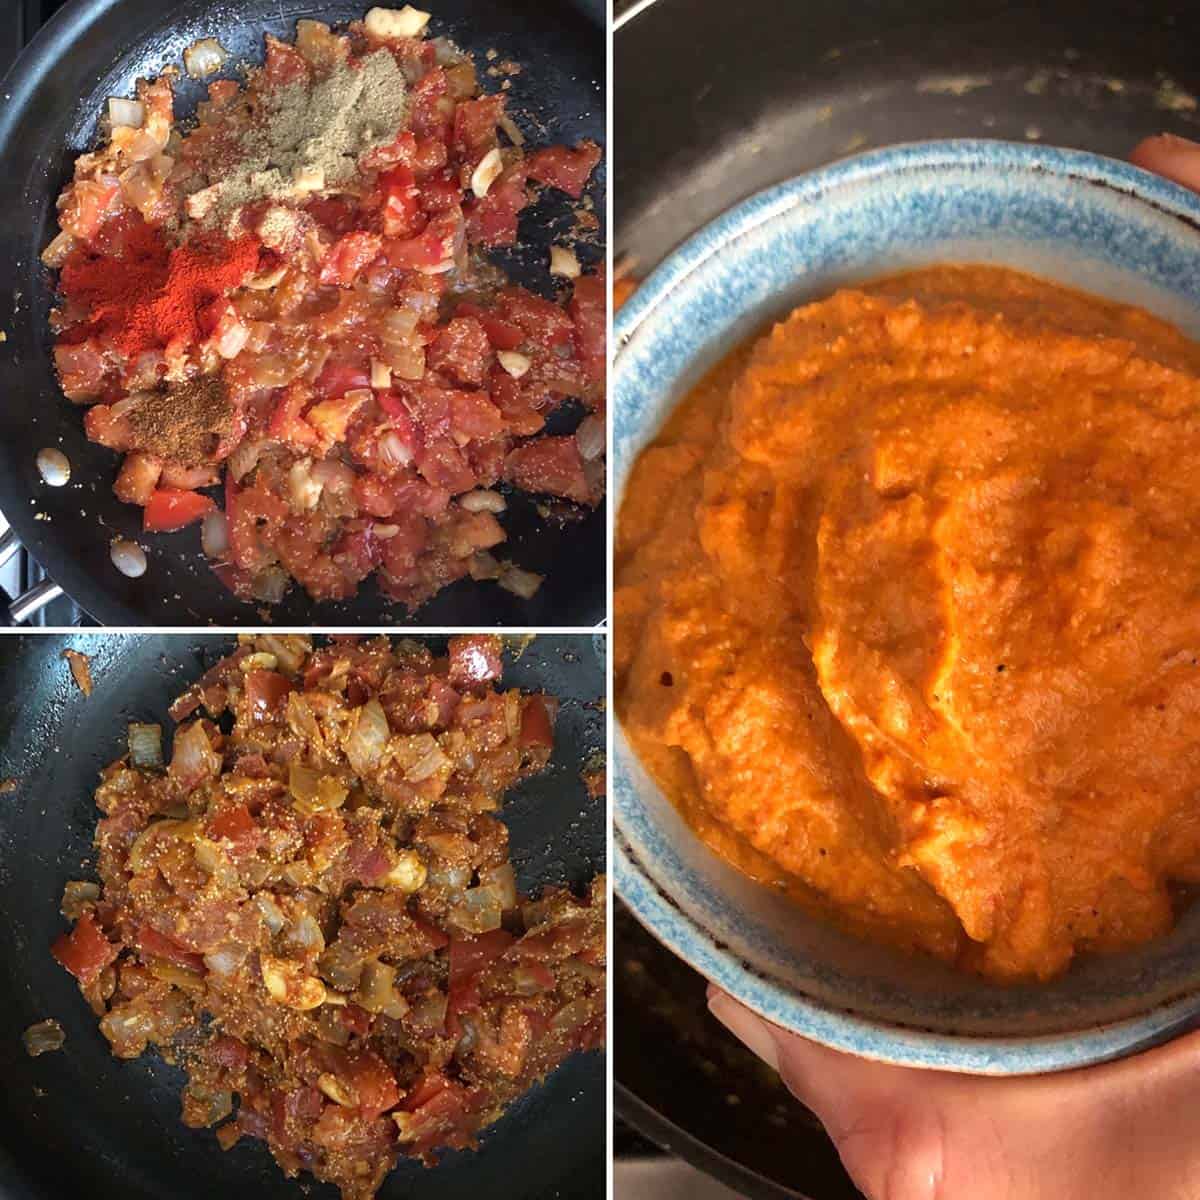 Step by step photos showing the making of salna/ gravy - cooked onions, tomatoes ground to a smooth paste